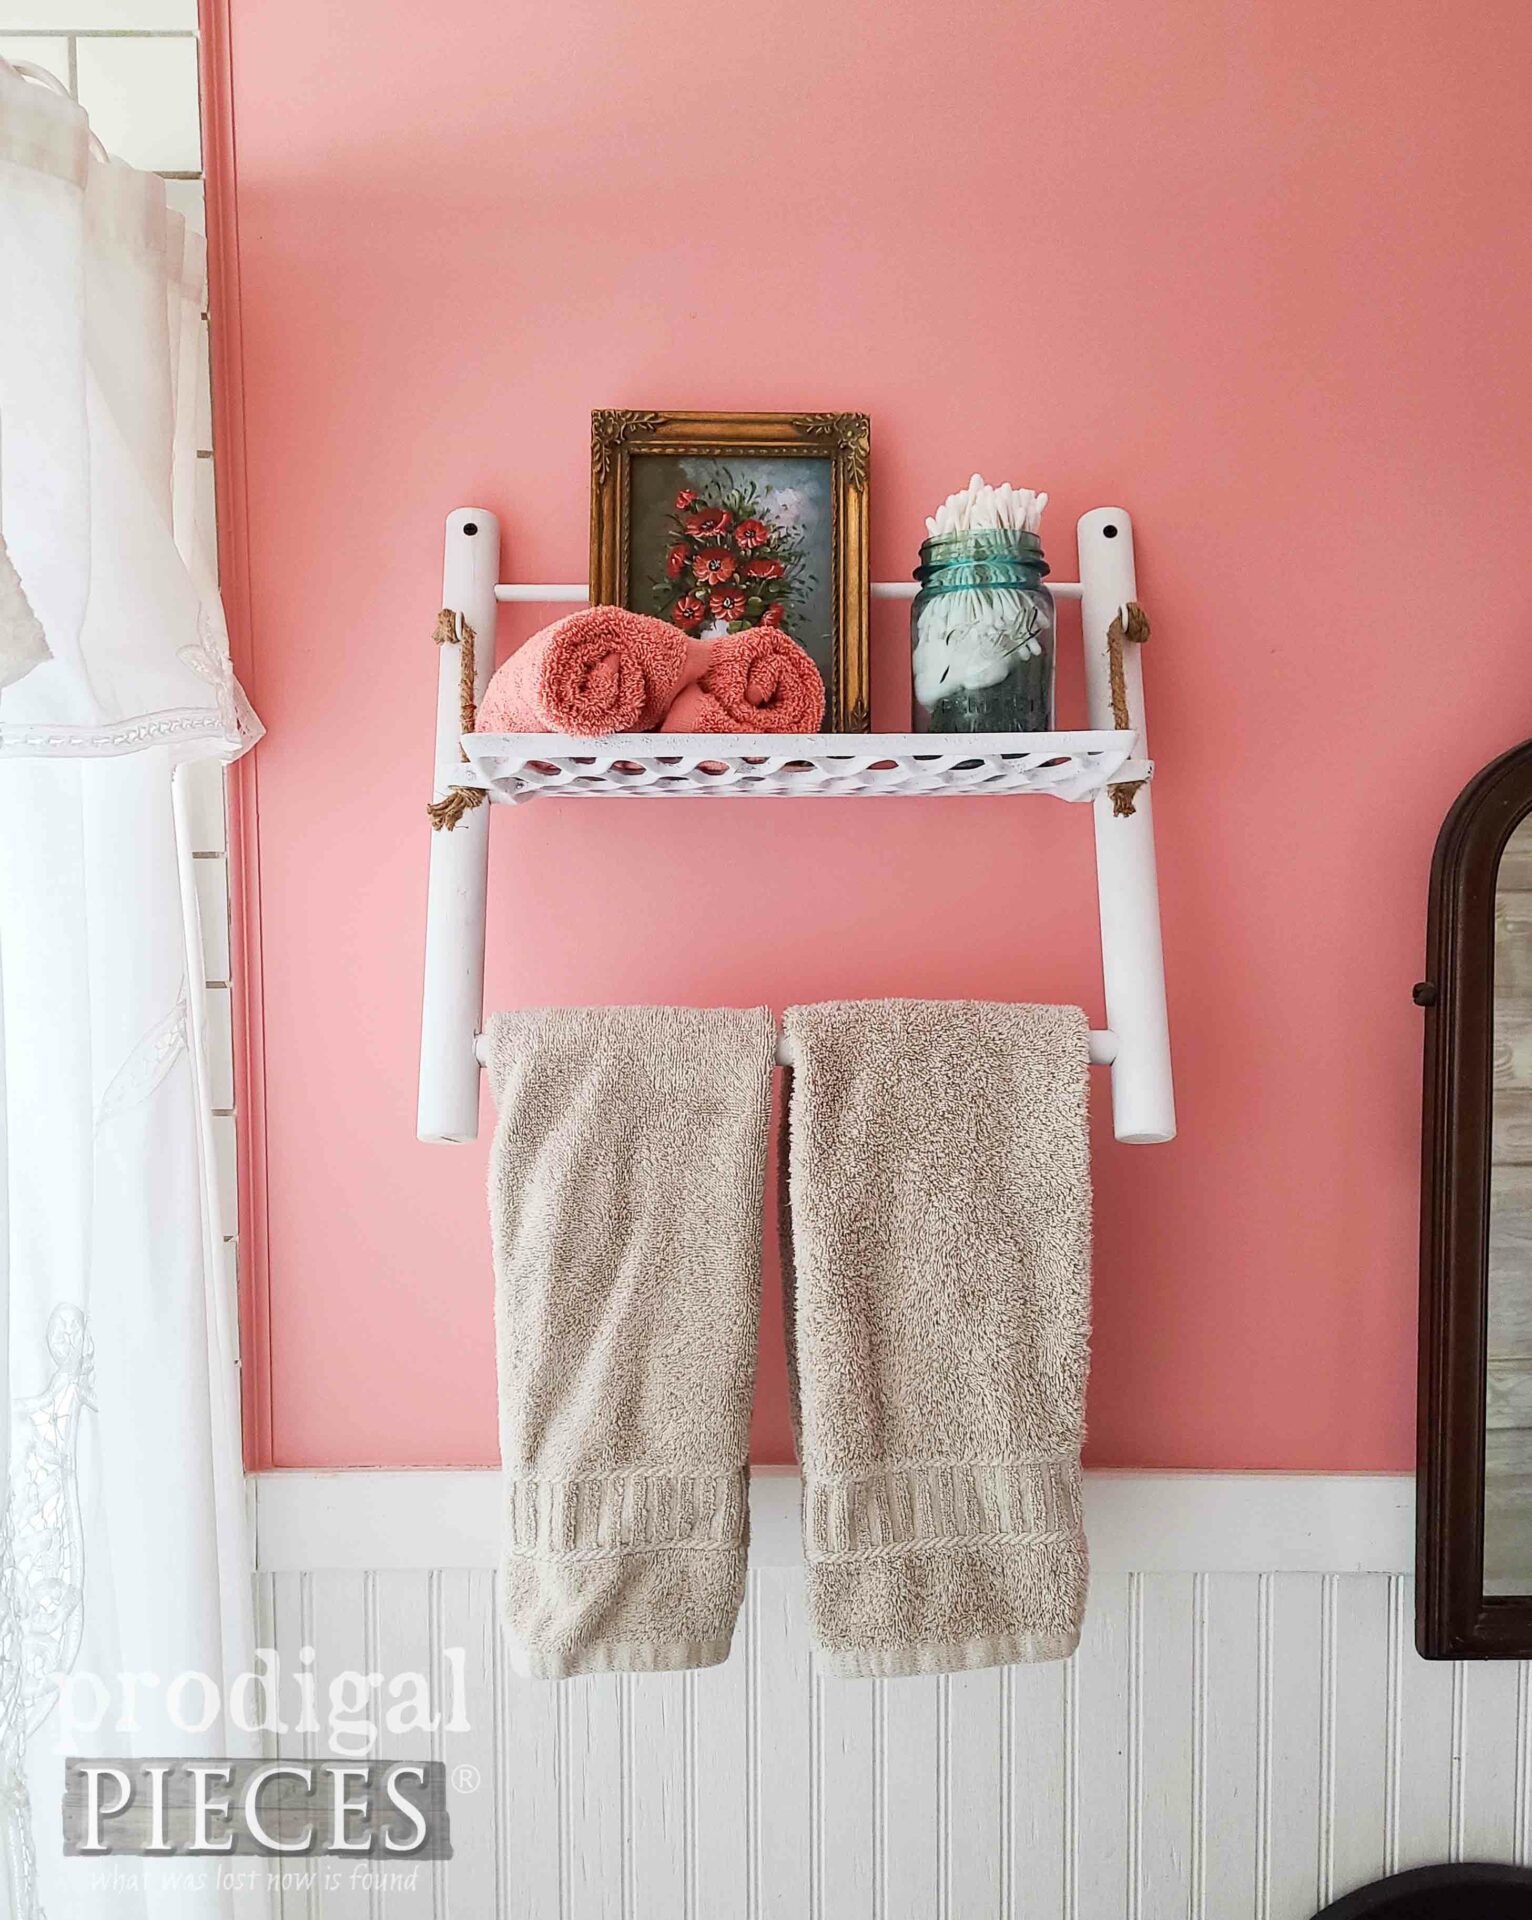 Reclaimed Treadle Machine Shelf in Blush Bathroom Makeover by Larissa of Prodigal Pieces | prodigalpieces.com #prodigalpieces